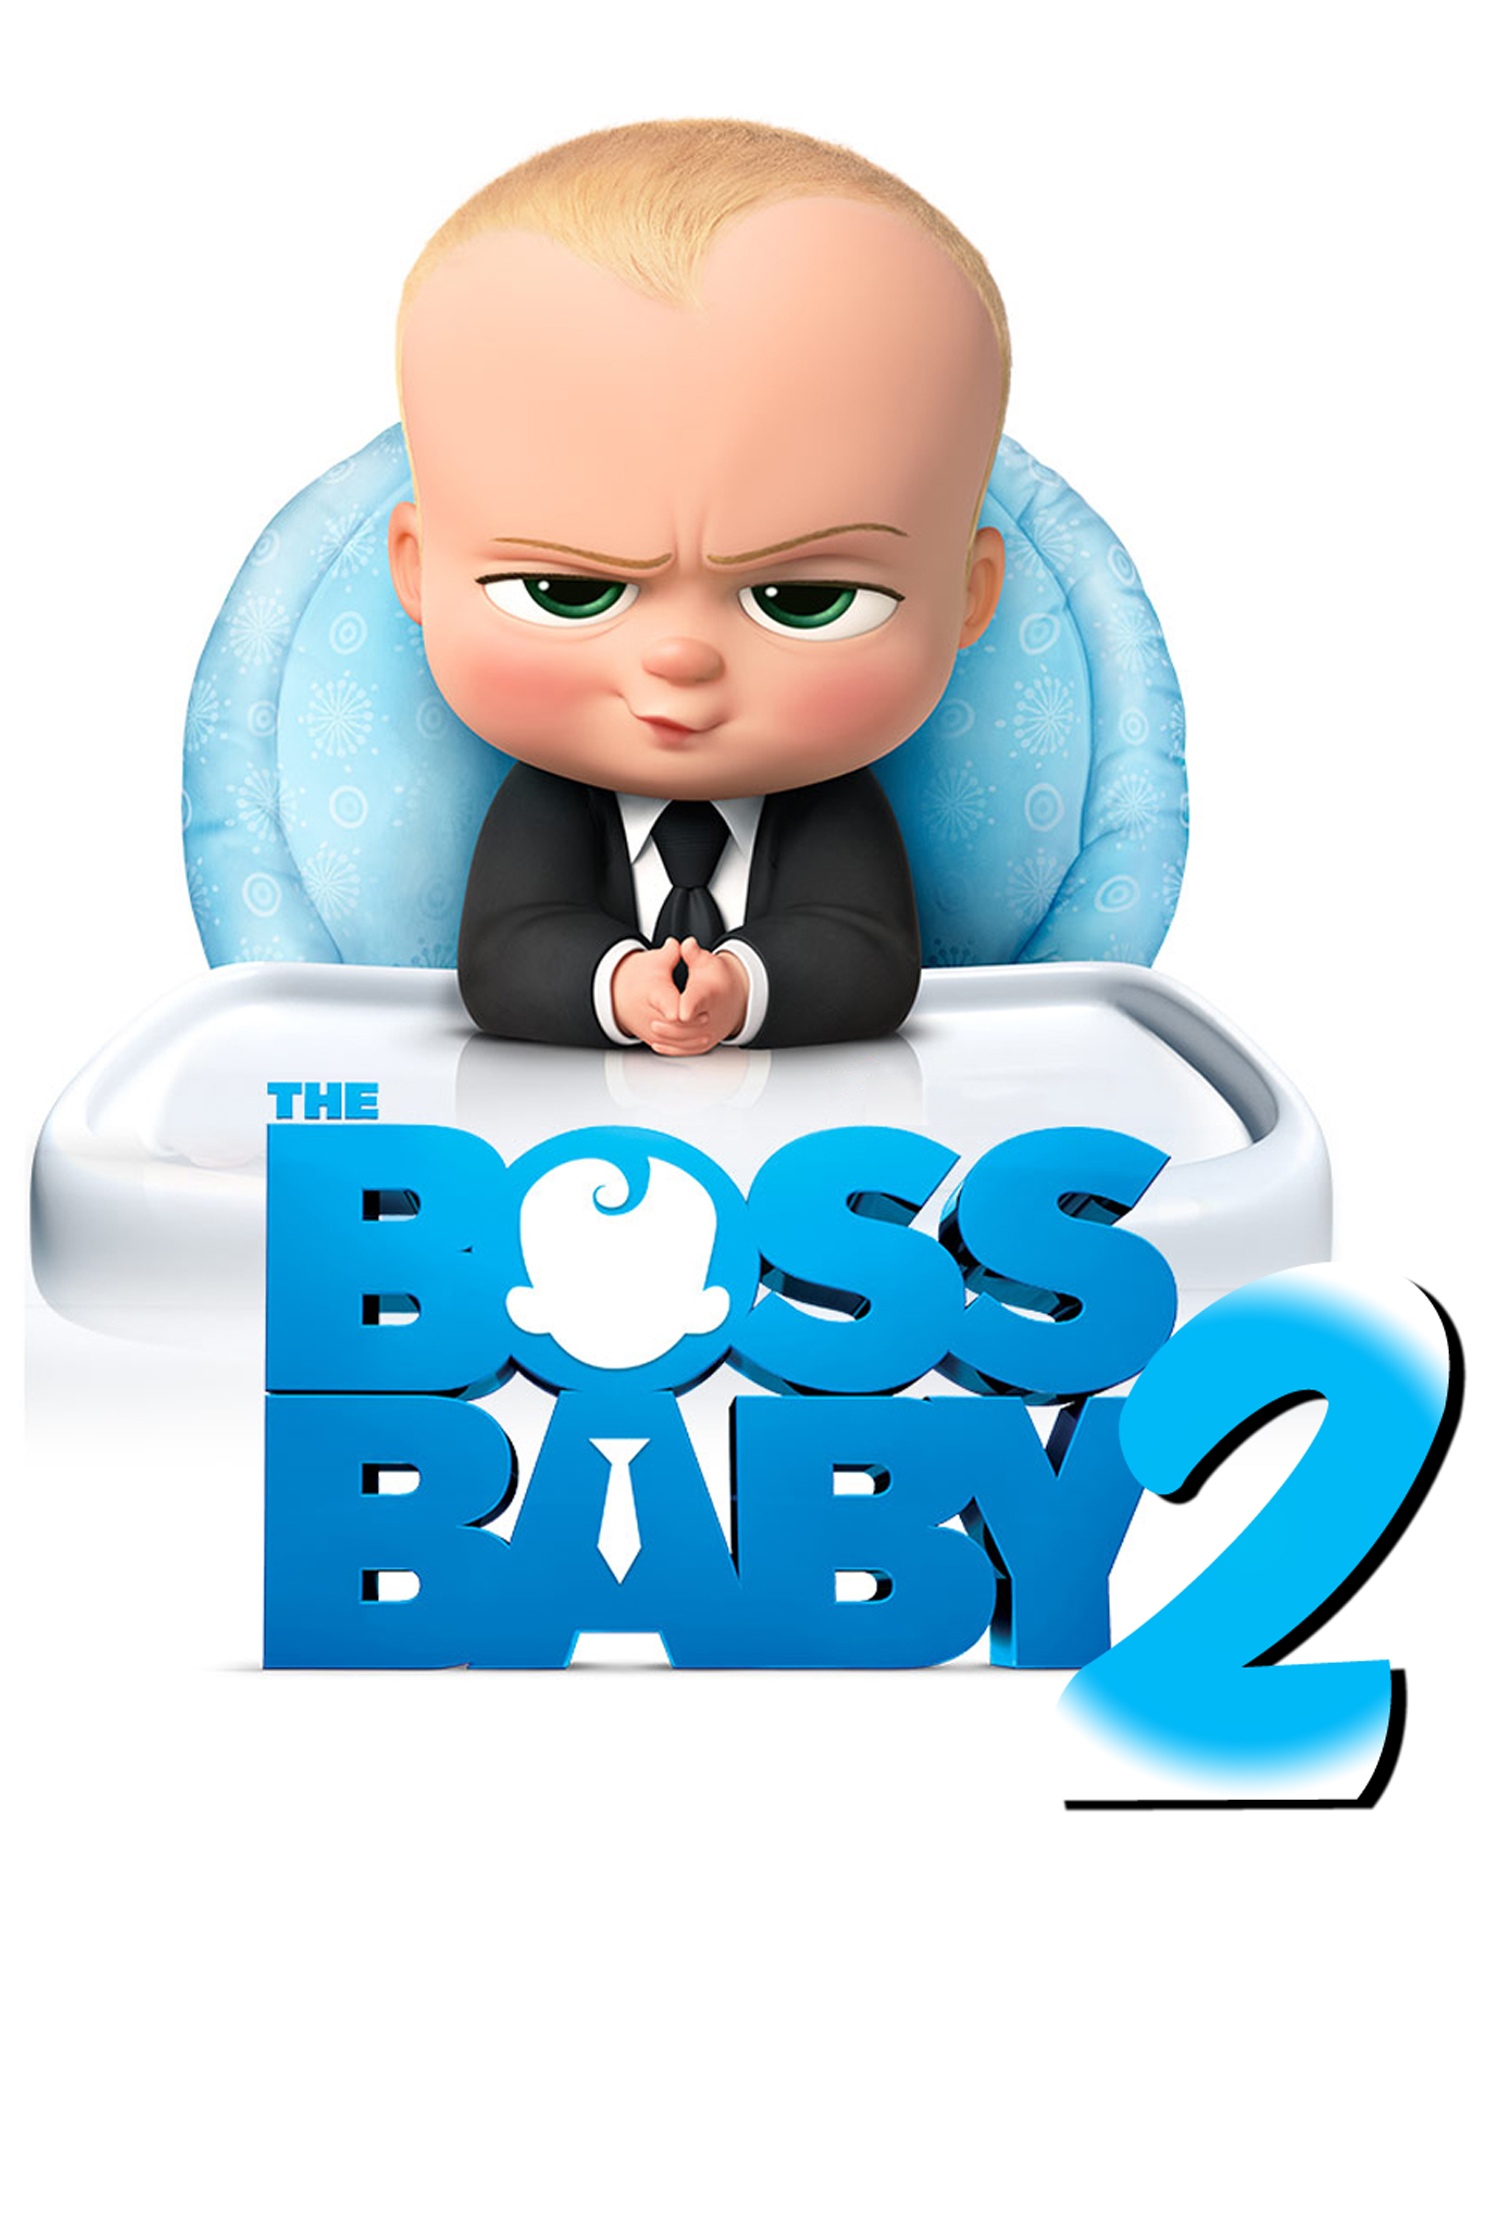 where can you find the new boss baby movie